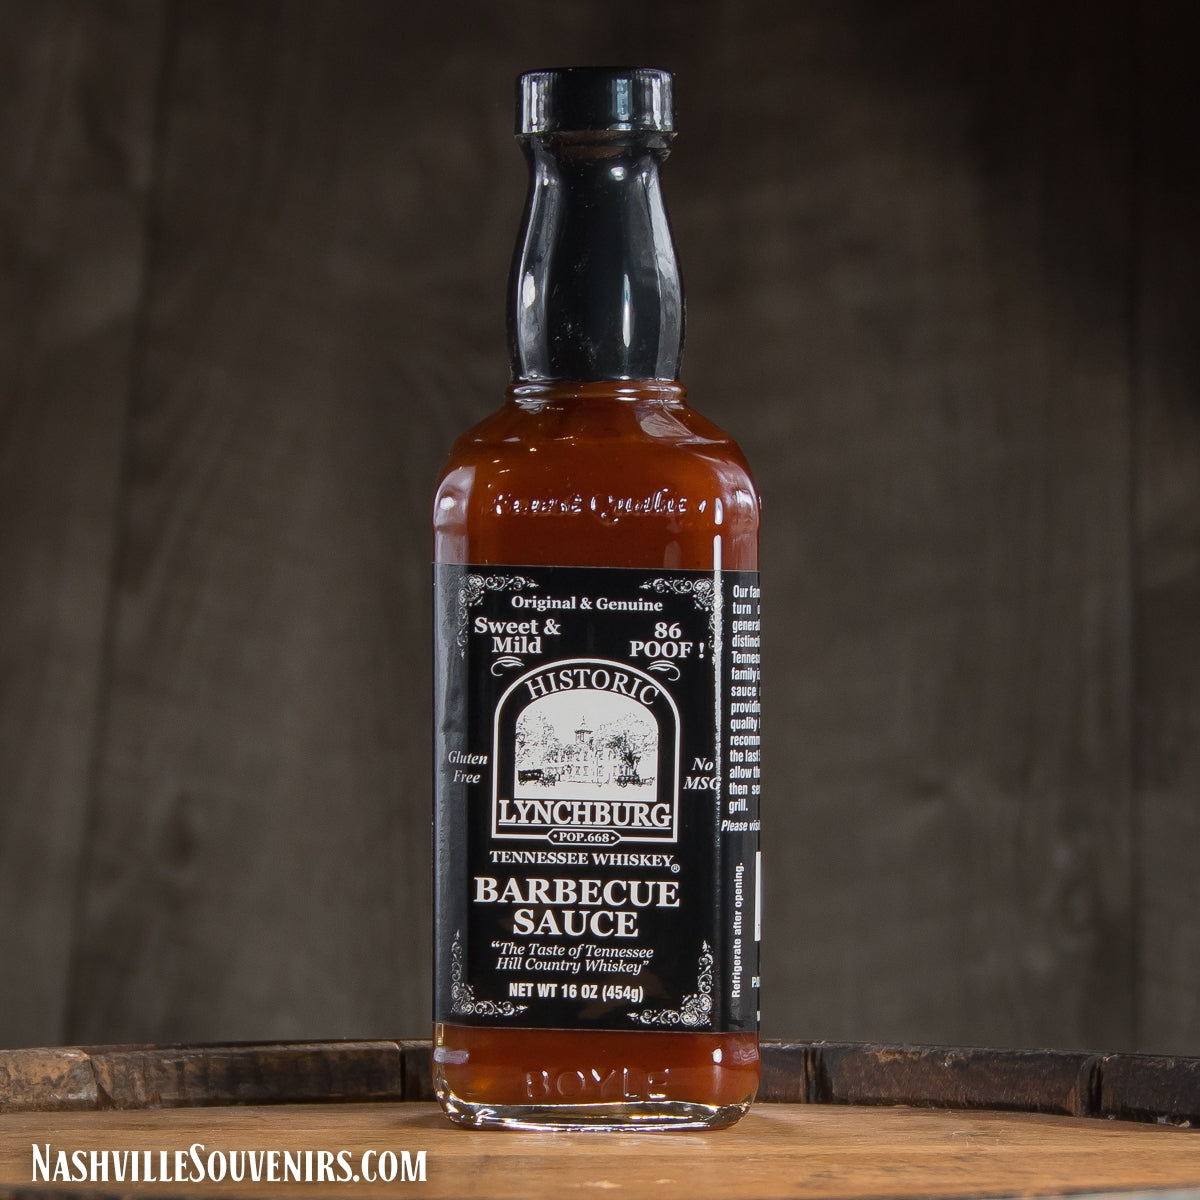 Buy Historic Lynchburg BBQ sauce that's sweet and mild containing real Jack Daniels Tennessee Whiskey.  FREE SHIPPING on all US orders over $75!